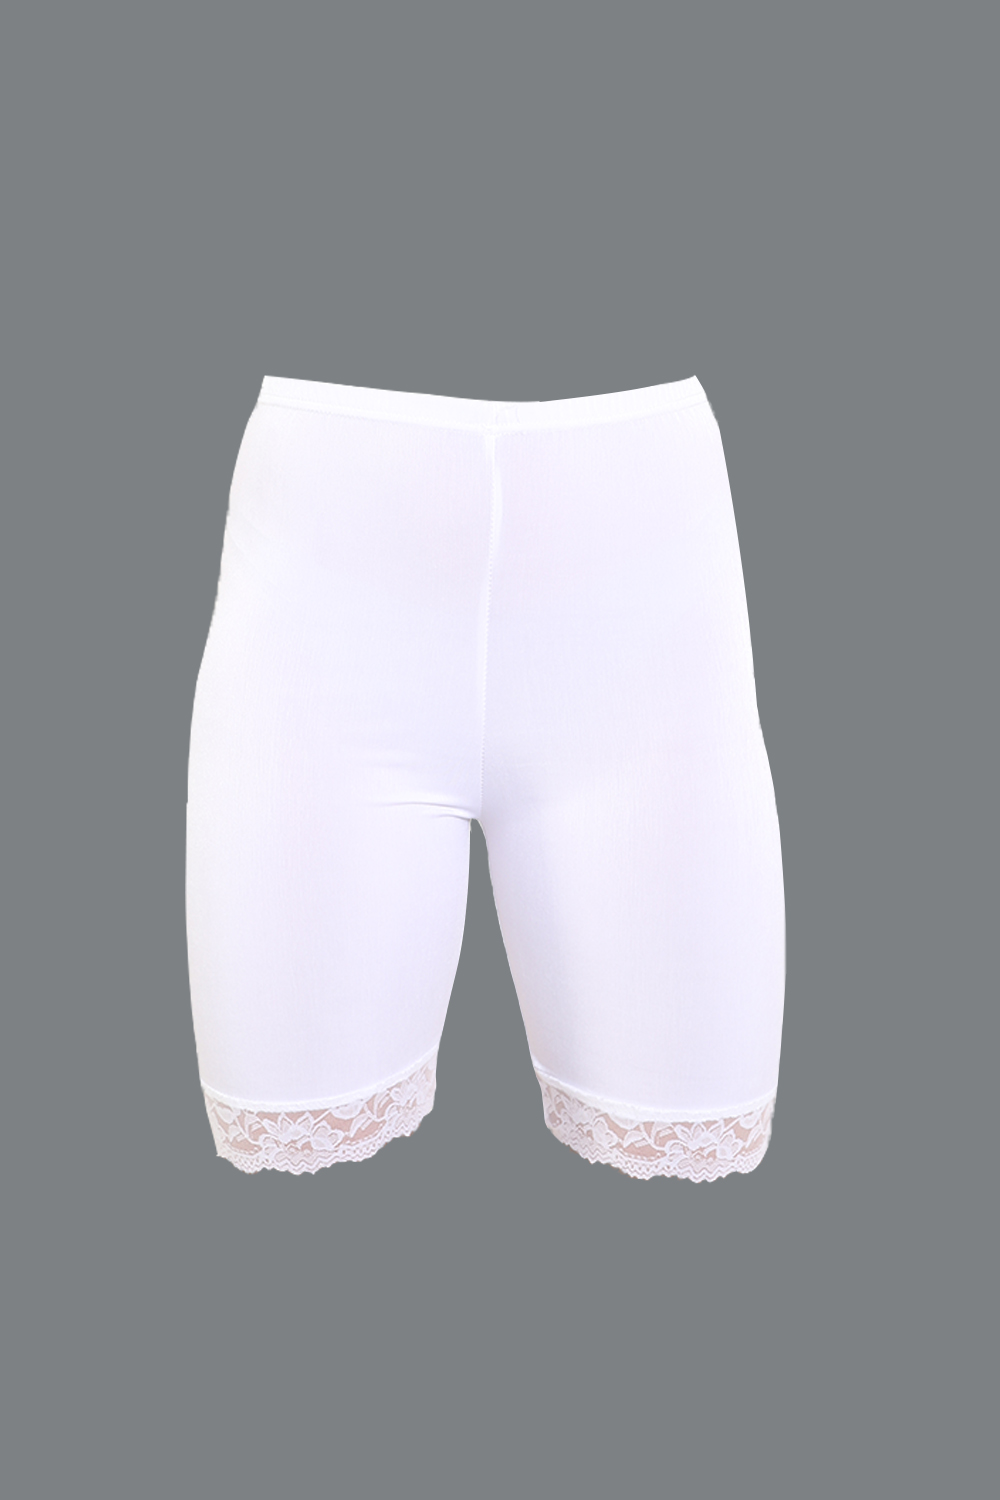 Crazy Chick Adult White Microfibre Lace Cycling Shorts for Sports and Gym